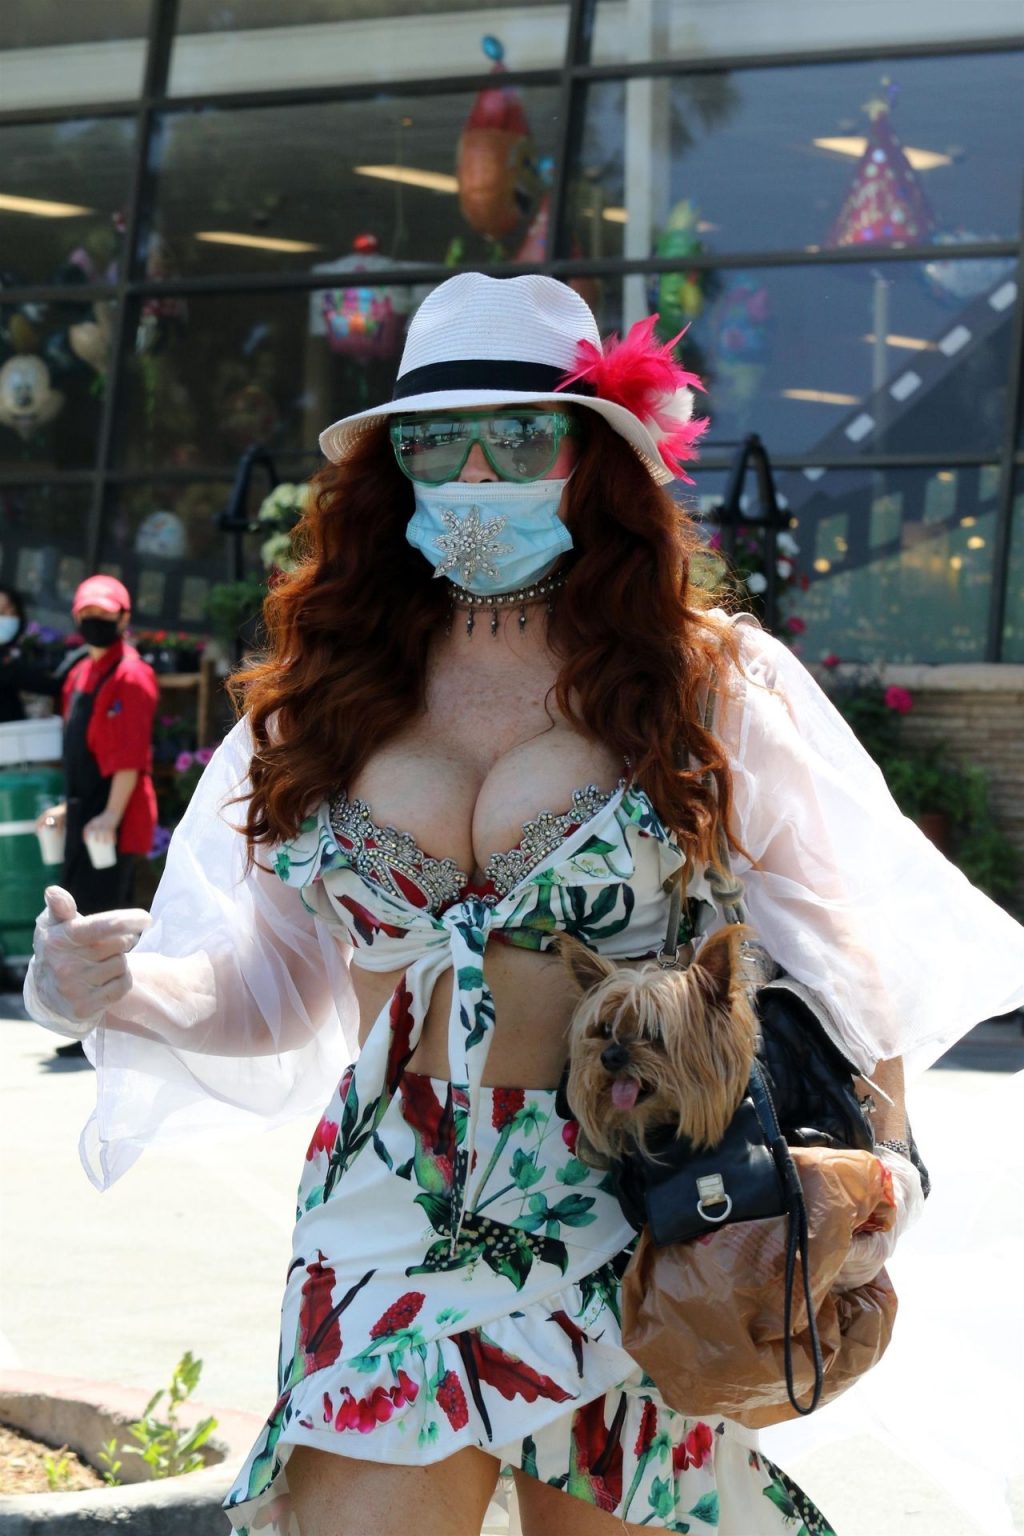 Phoebe Price Busts Out Shopping at Ralphs (74 Photos)